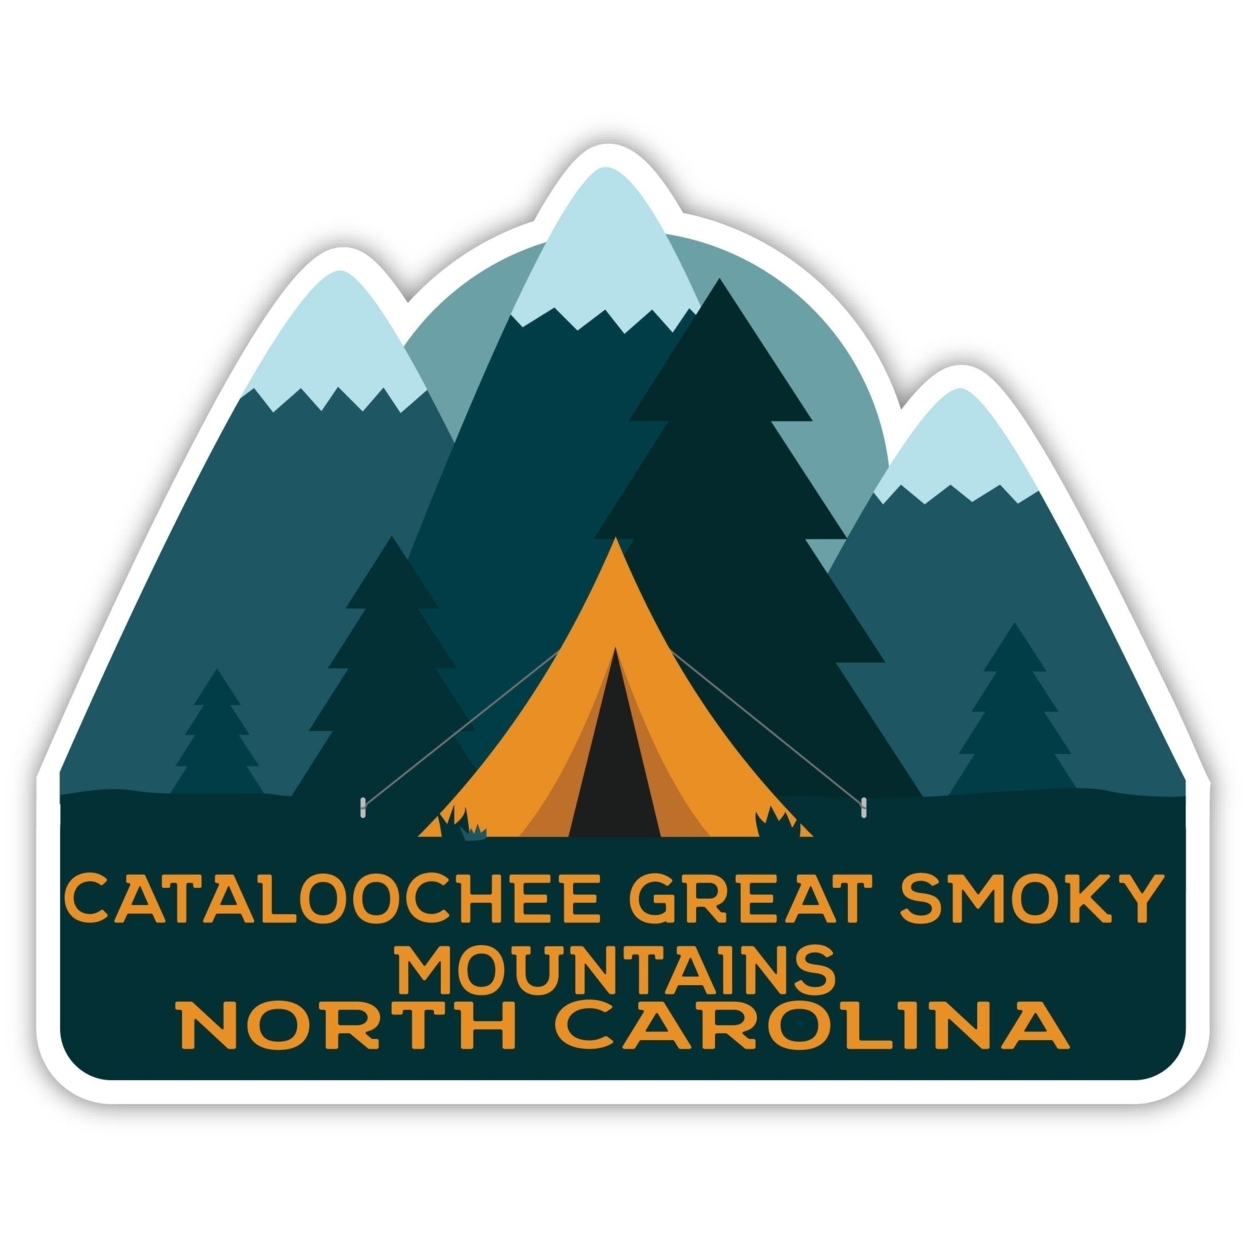 Cataloochee Great Smoky Mountains North Carolina Souvenir Decorative Stickers (Choose Theme And Size) - 4-Pack, 2-Inch, Tent